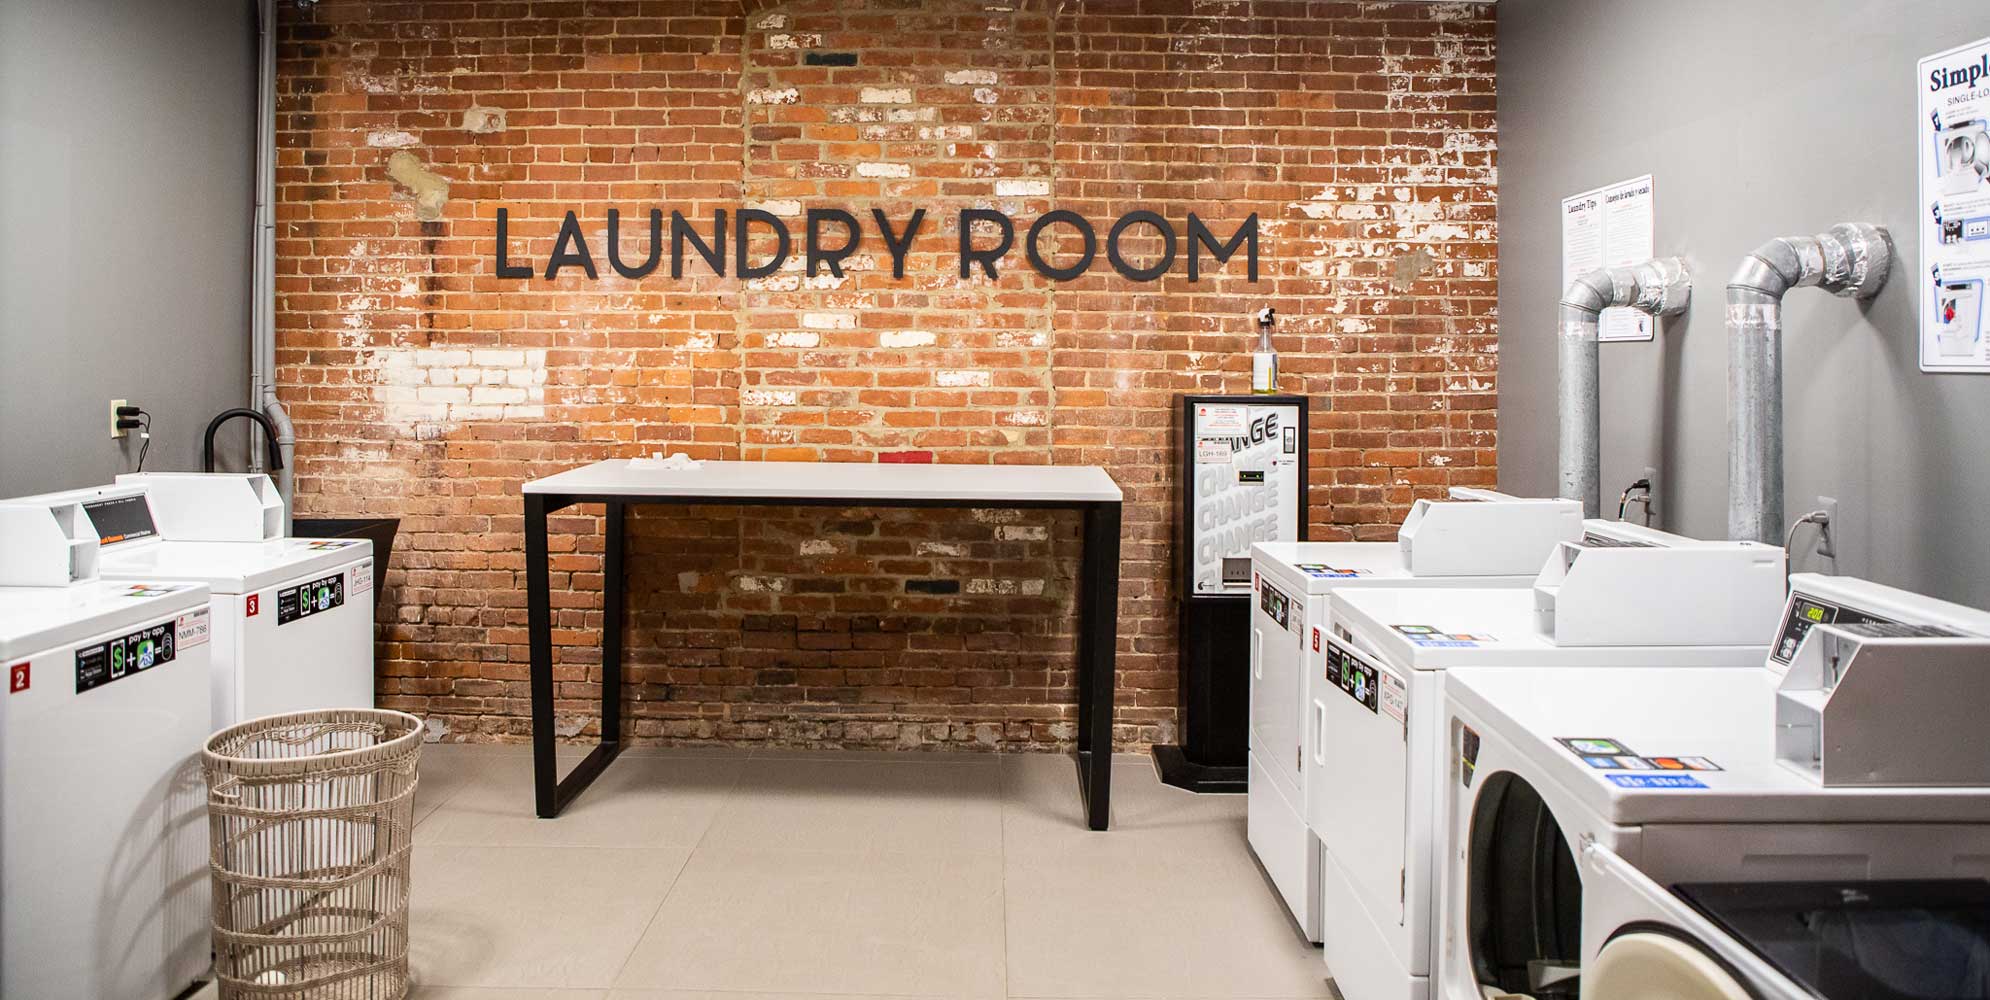 Laundry Room in Somerville, New Jersey